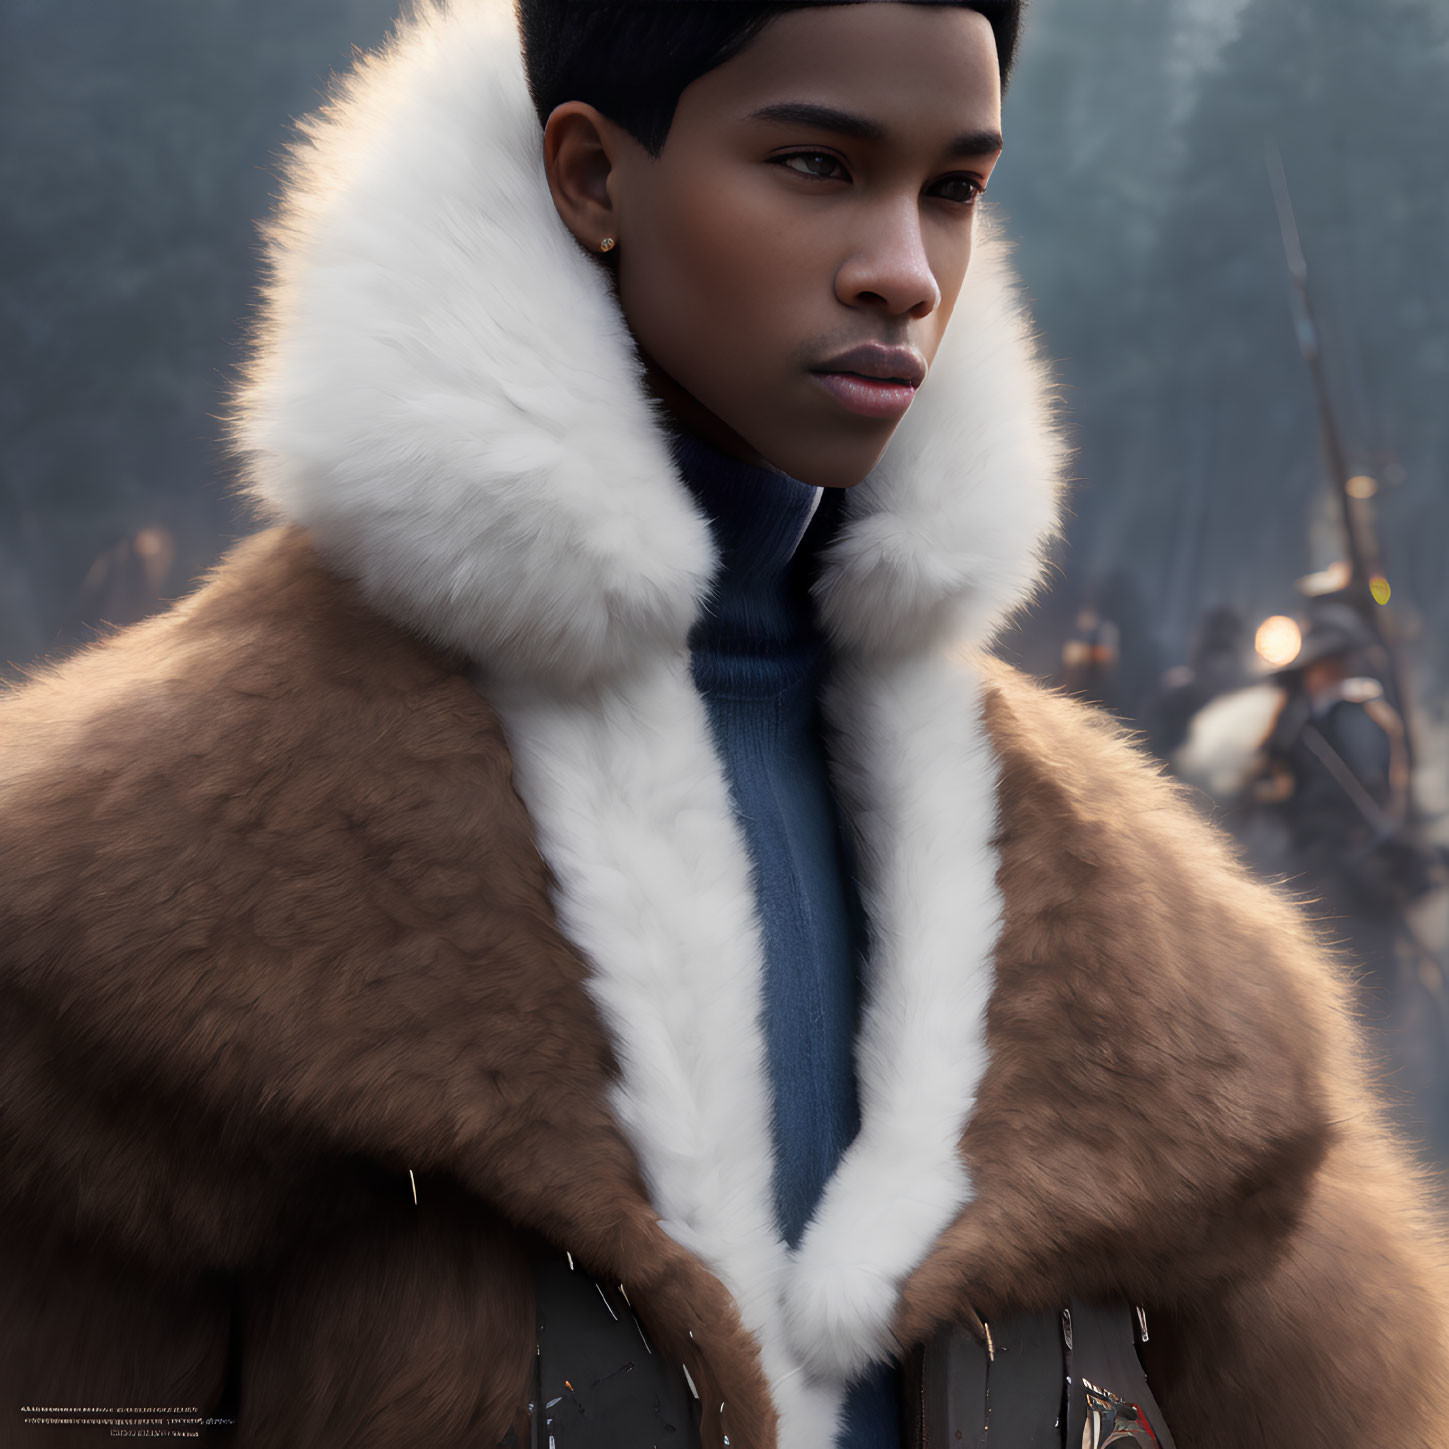 Digital portrait of person in brown fur coat with white collar, gazing thoughtfully